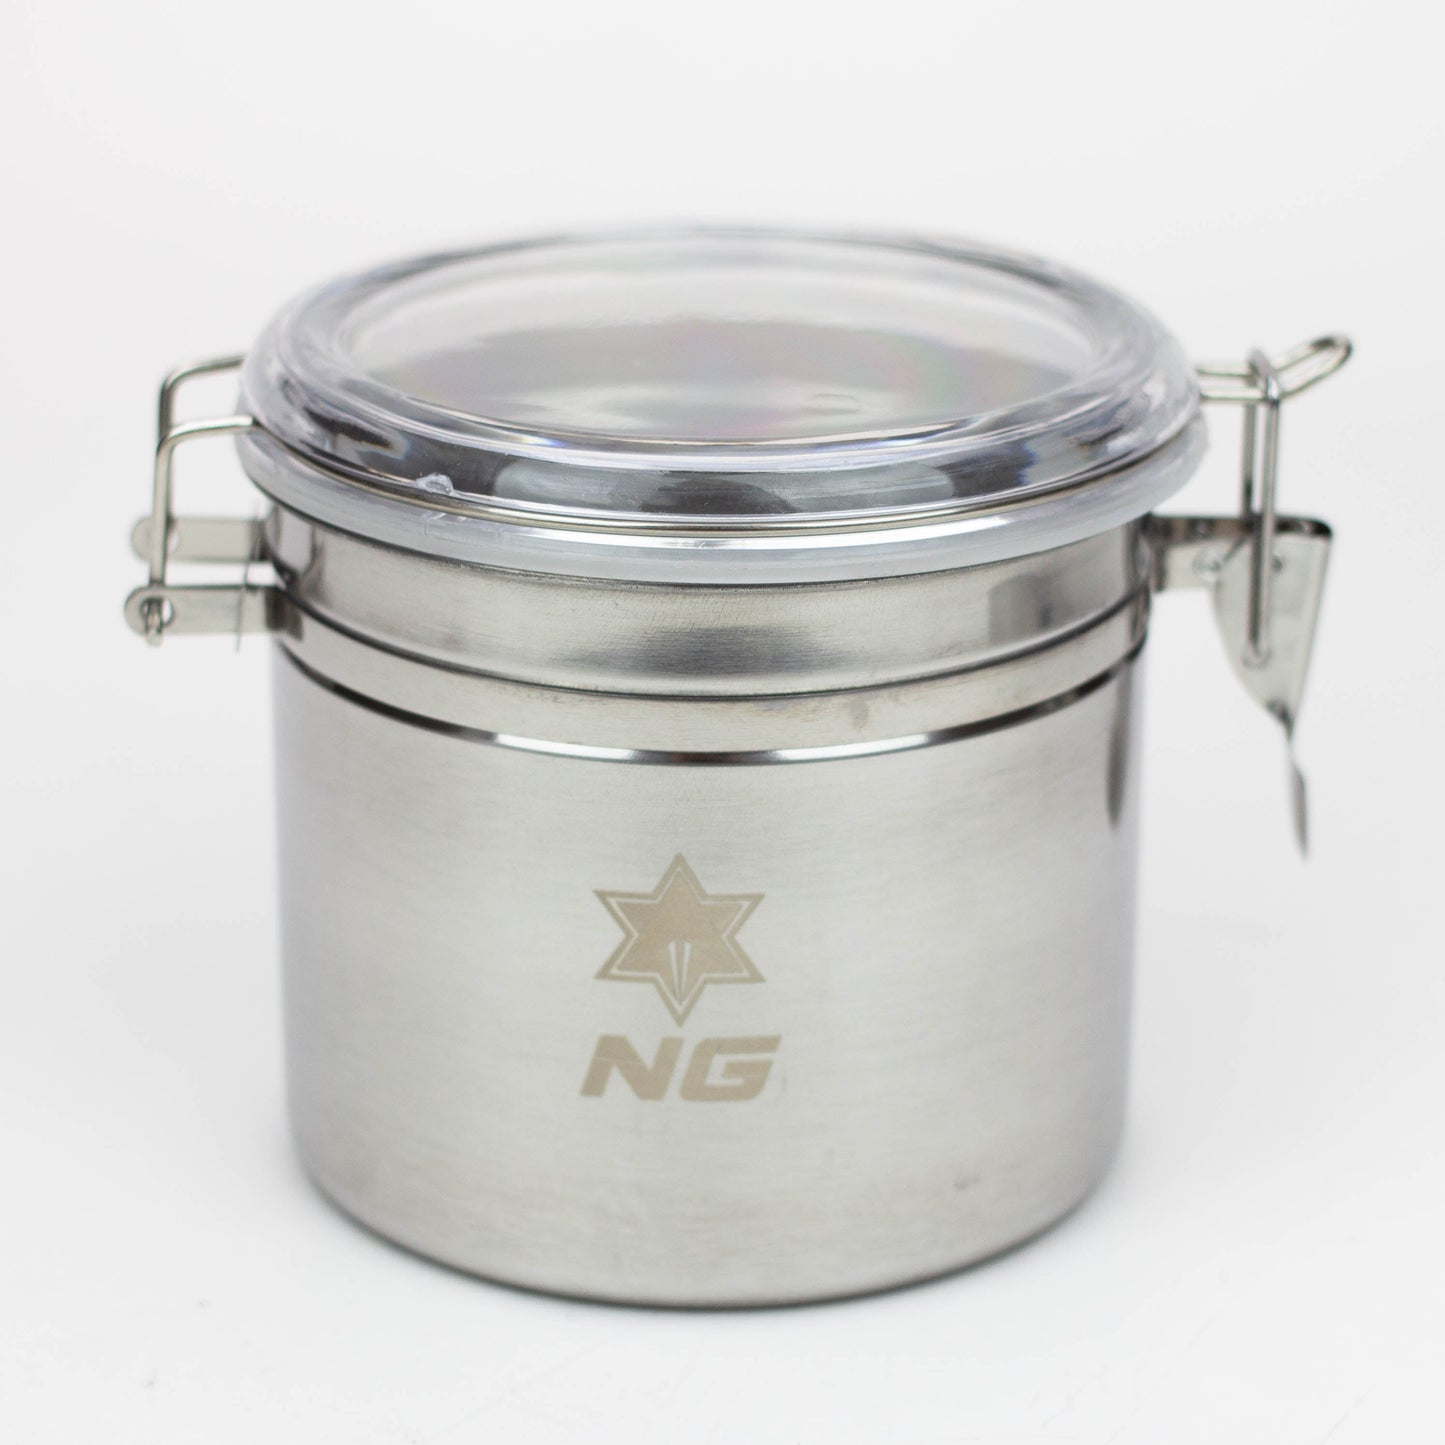 NG - Stainless Metal Canister_4